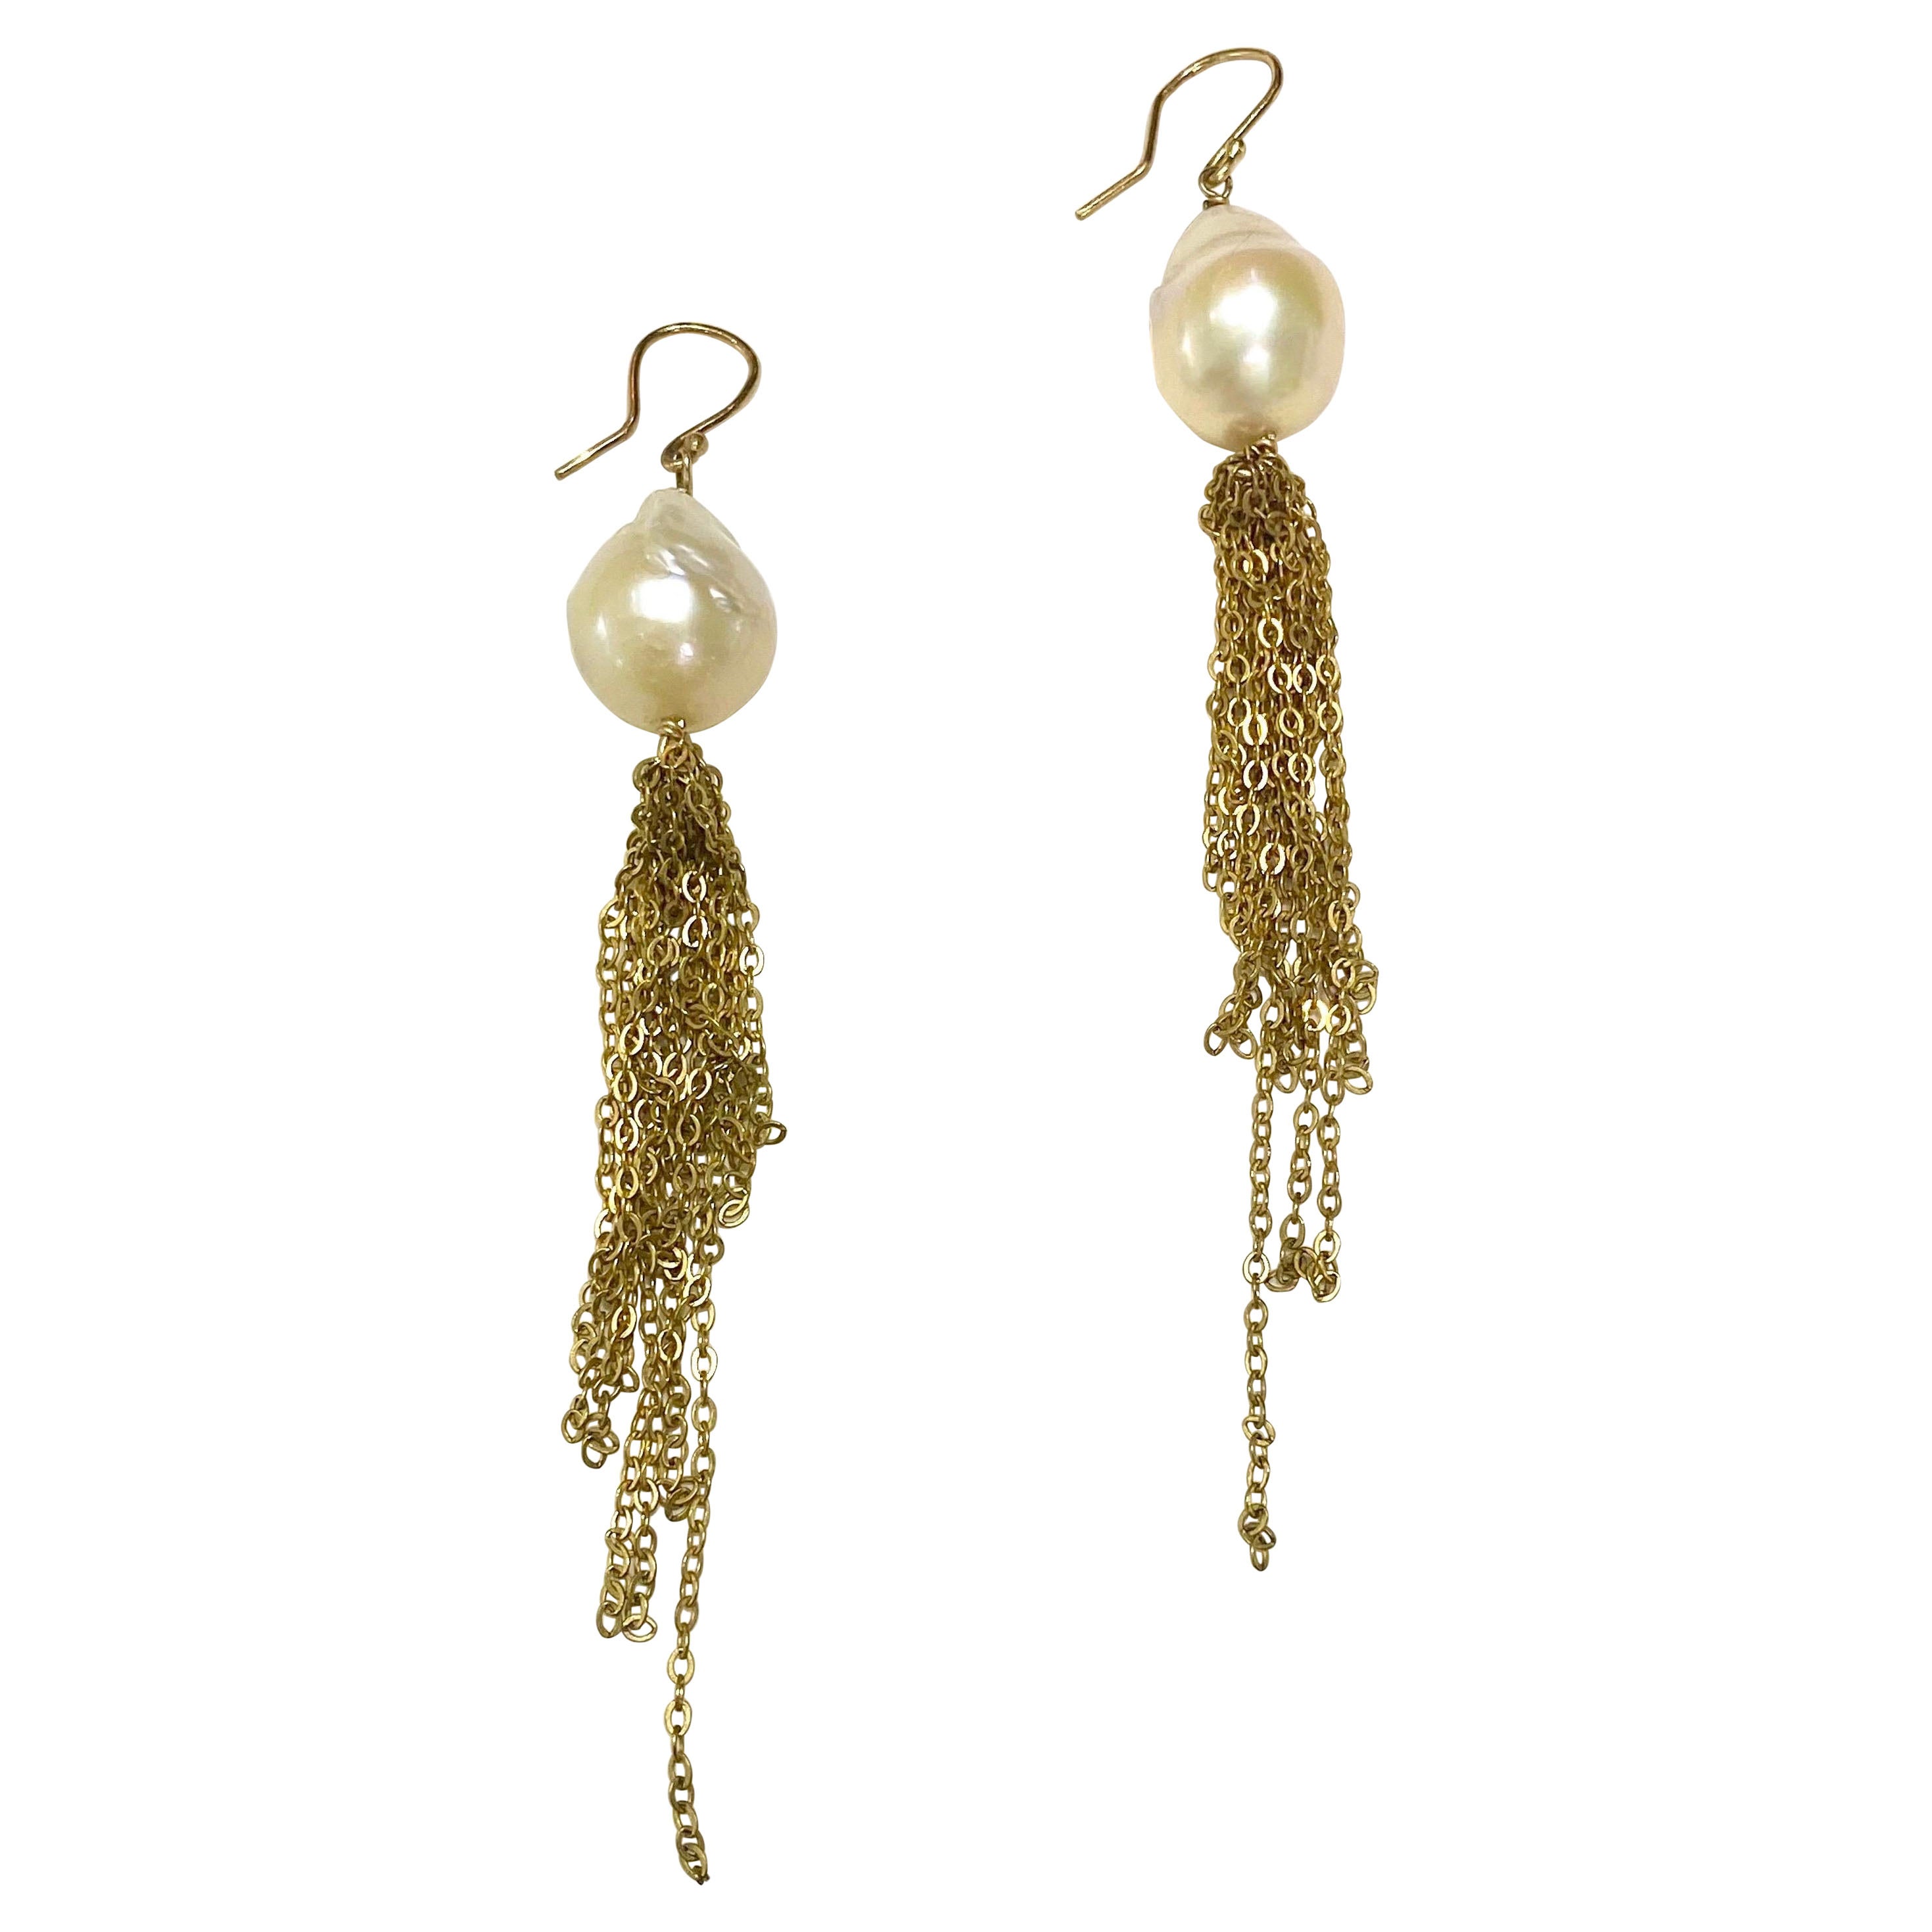 Baroque Freshwater Pearl Earrings with Gold Tassels